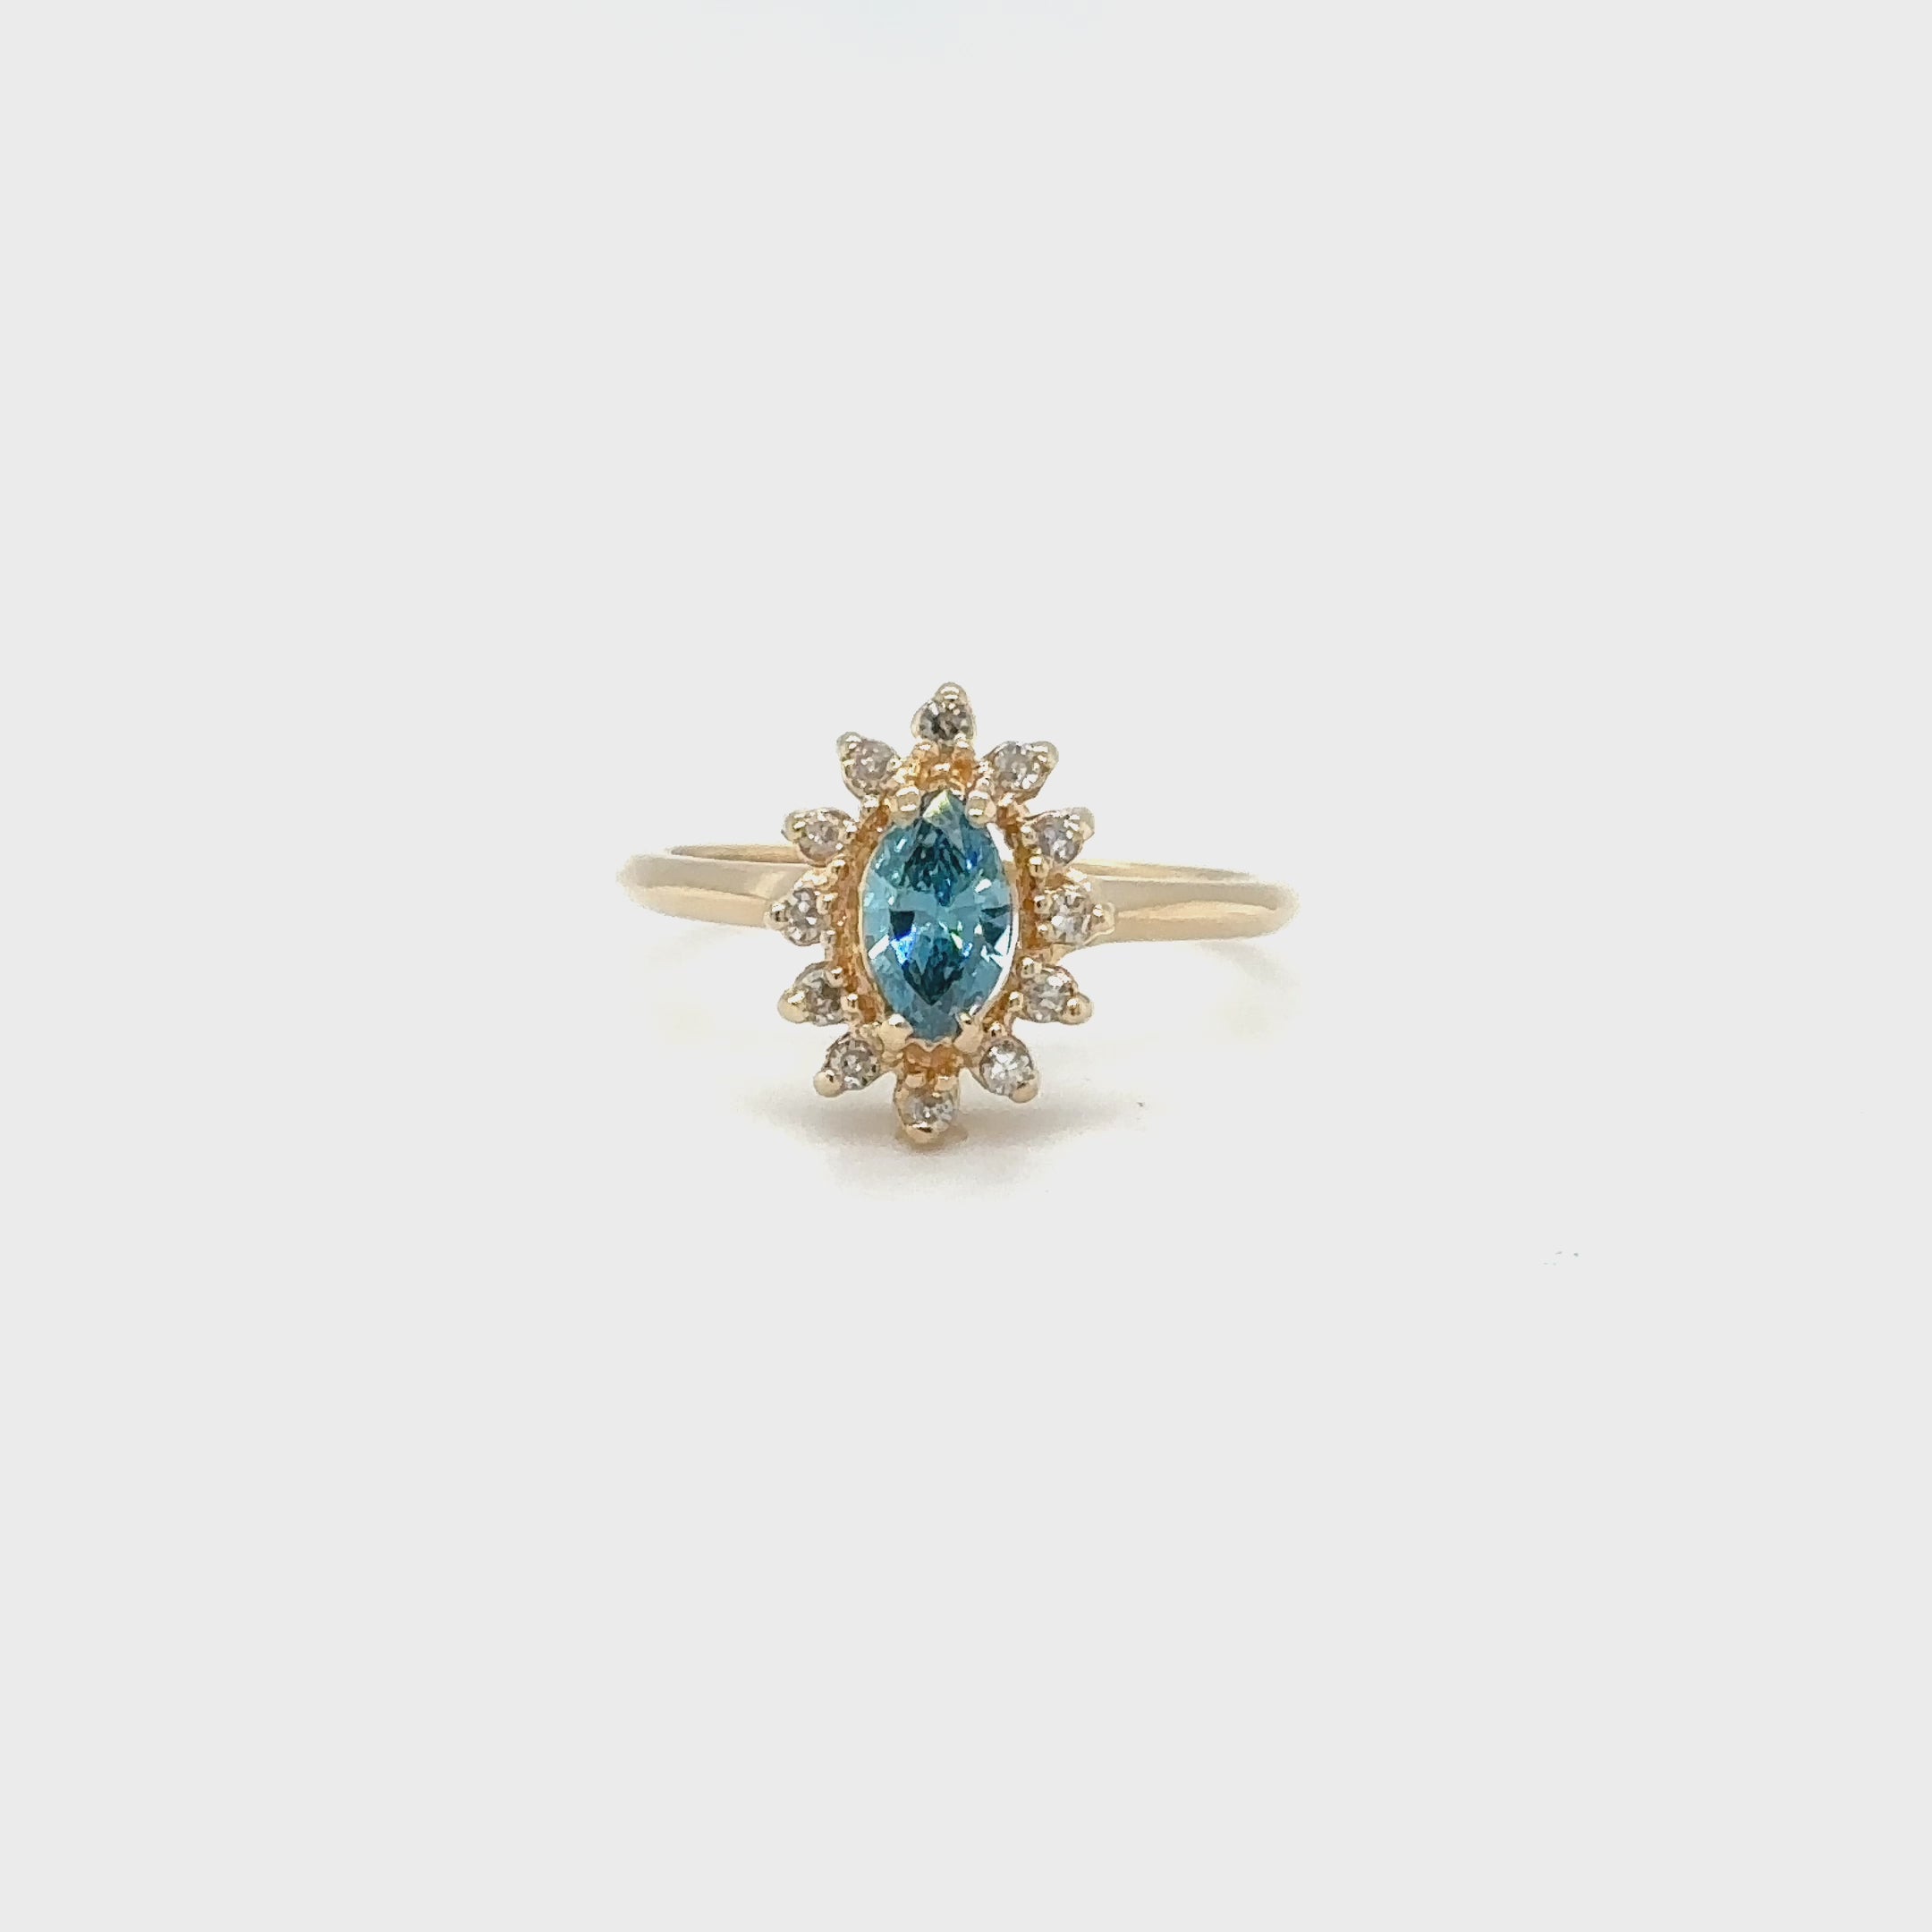 GIA Certified Natural Fancy Blue Diamond Ring 14K Solid Gold .52tcw Colored Diamond Fancy Gemstone Blue Engagement Bridal Wedding Jewelry